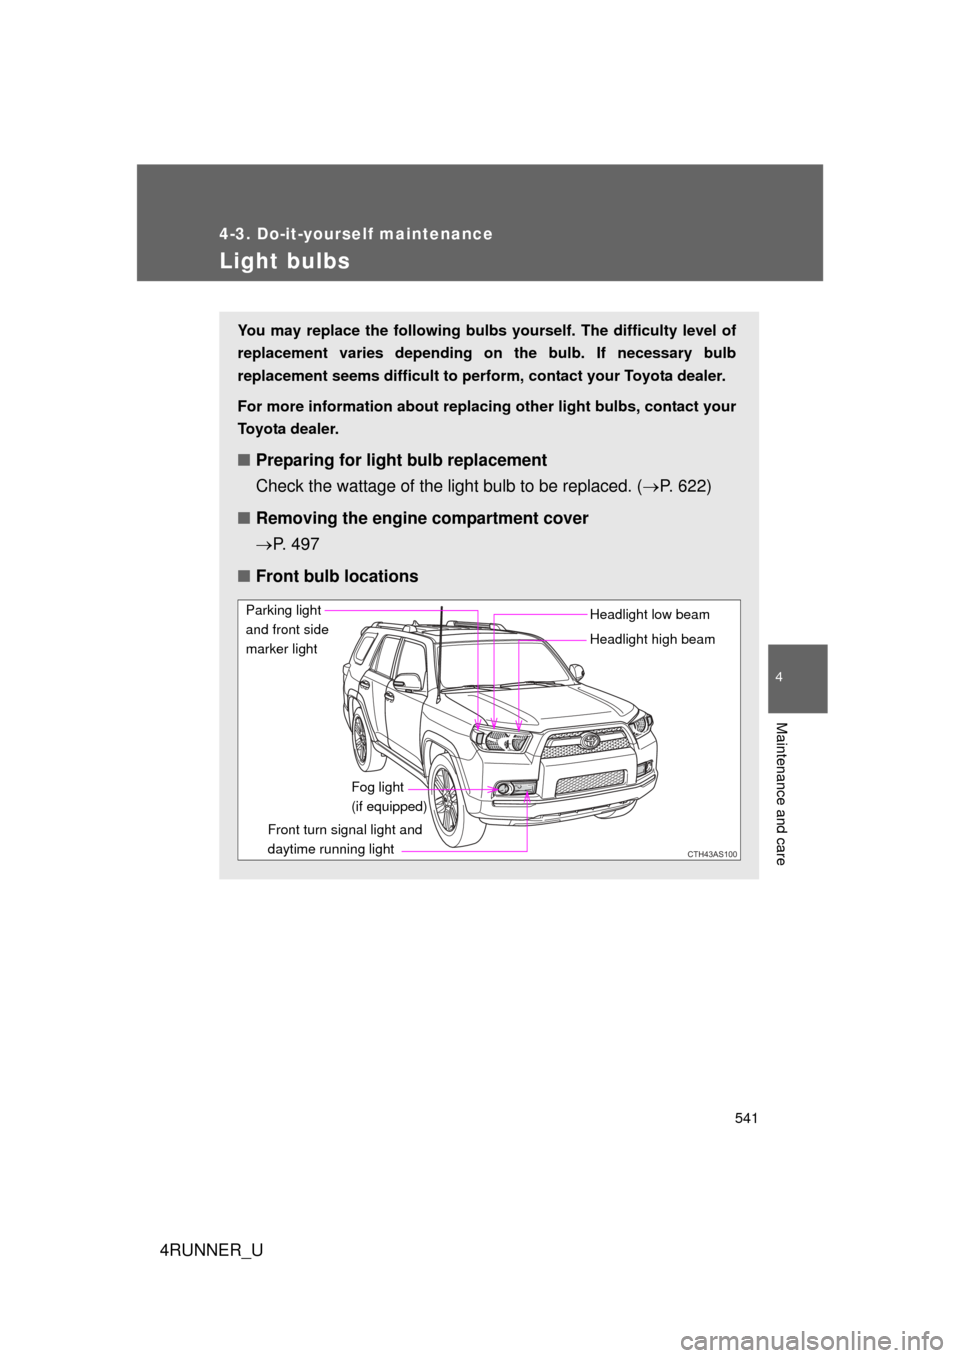 TOYOTA 4RUNNER 2010 N280 / 5.G Owners Manual 541
4-3. Do-it-yourself maintenance
4
Maintenance and care
4RUNNER_U
Light bulbs
You may replace the following bulbs yourself. The difficulty level of
replacement varies depending on the bulb. If nece